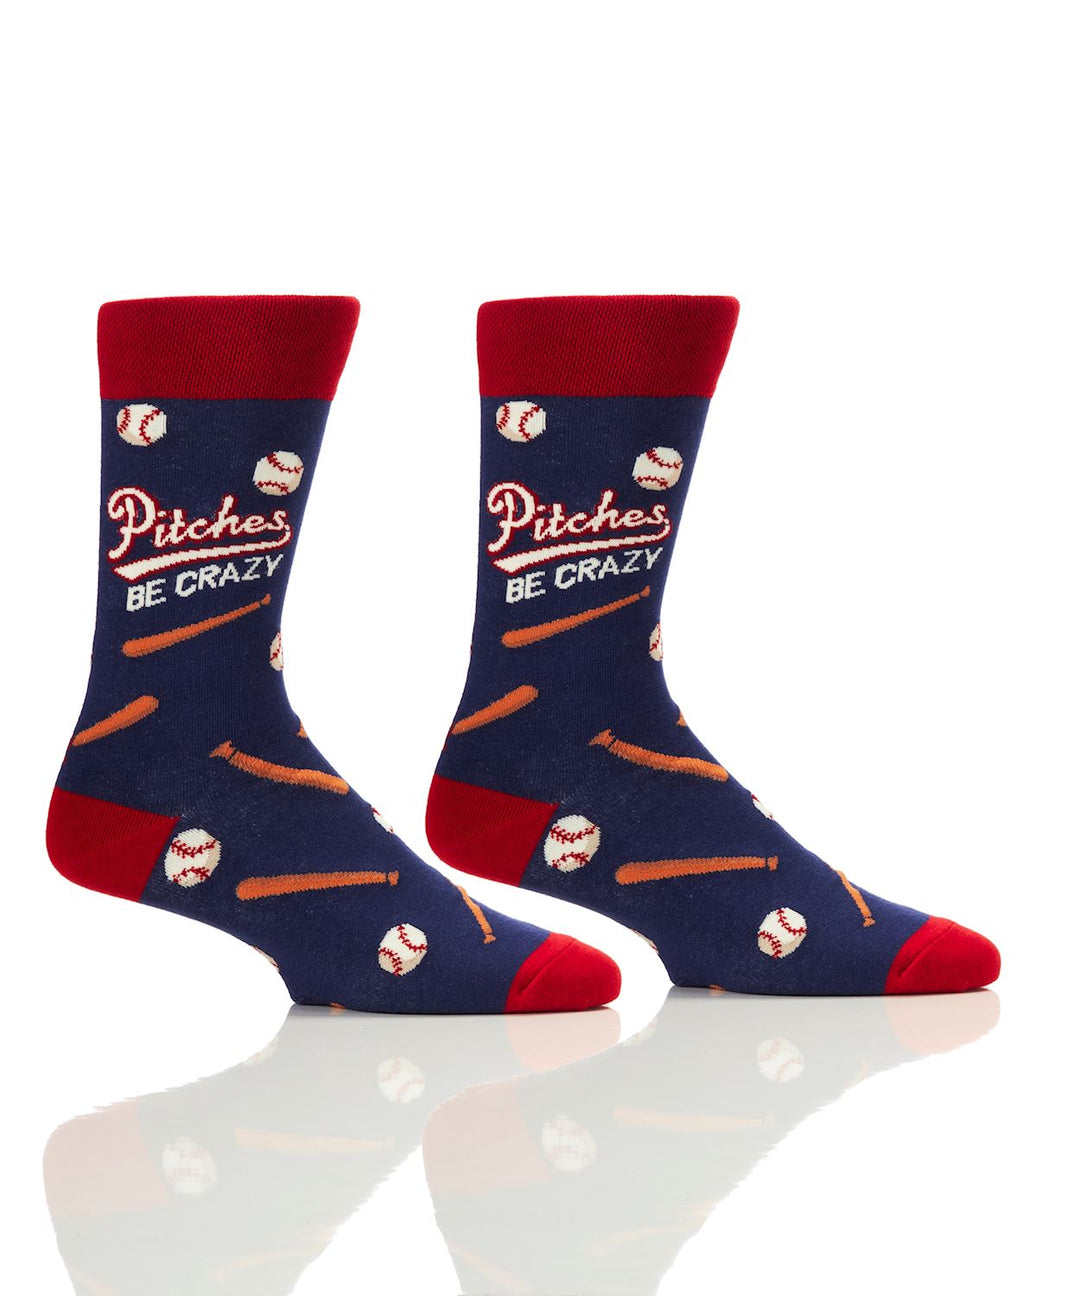 "Pitches Be Crazy" Cotton Dress Crew Socks by YO Sox - Large